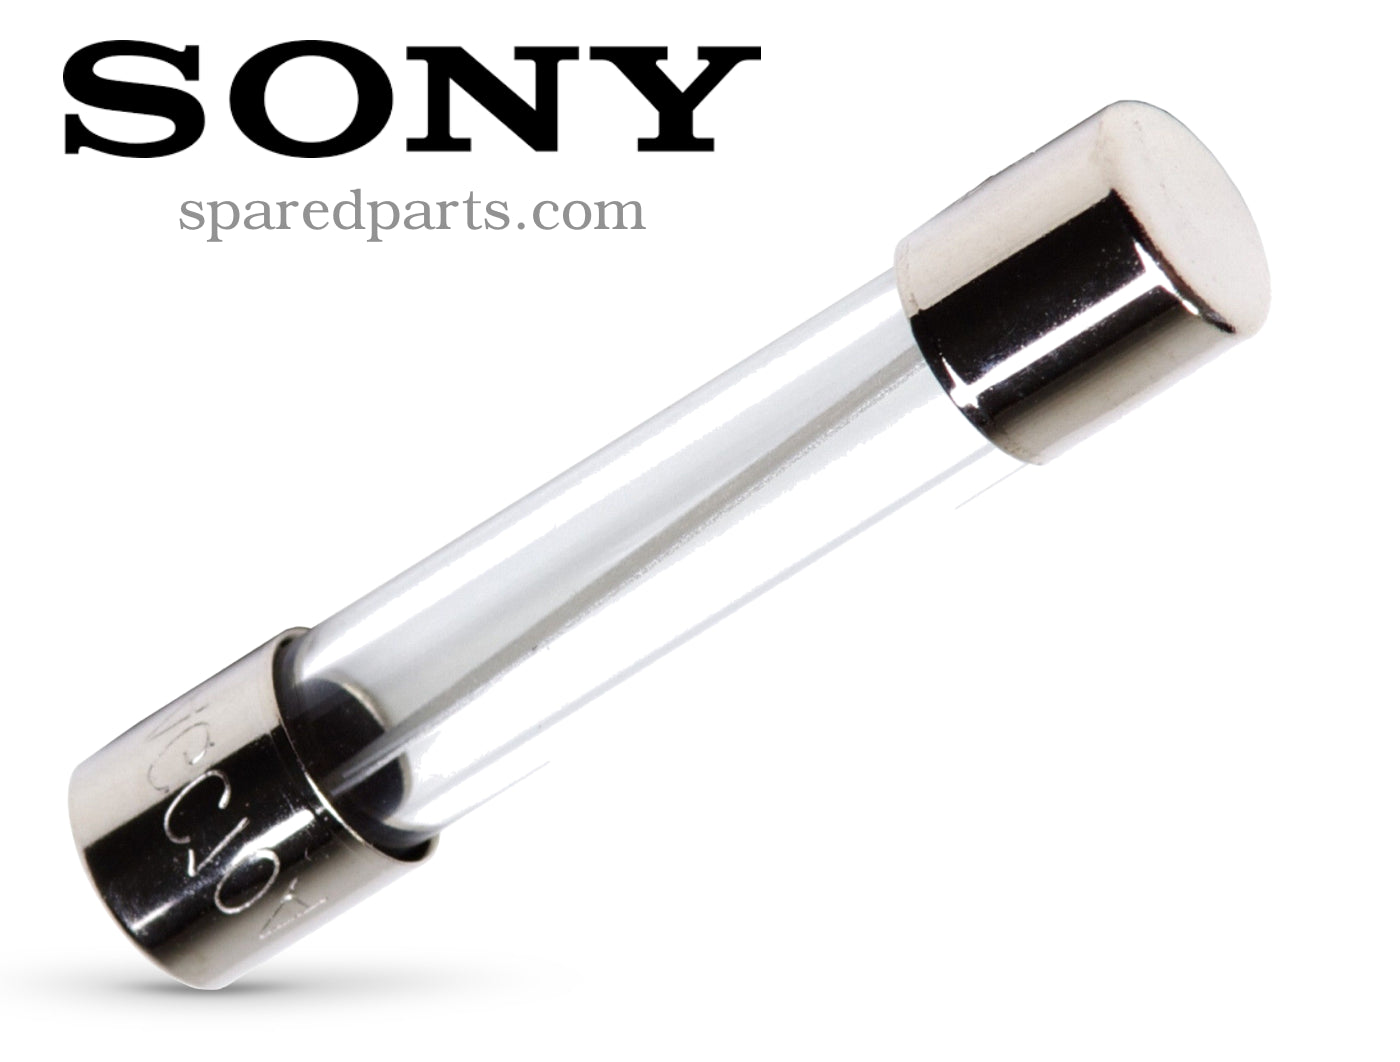 Sony Safety Fuse 153250533 1-532-505-33